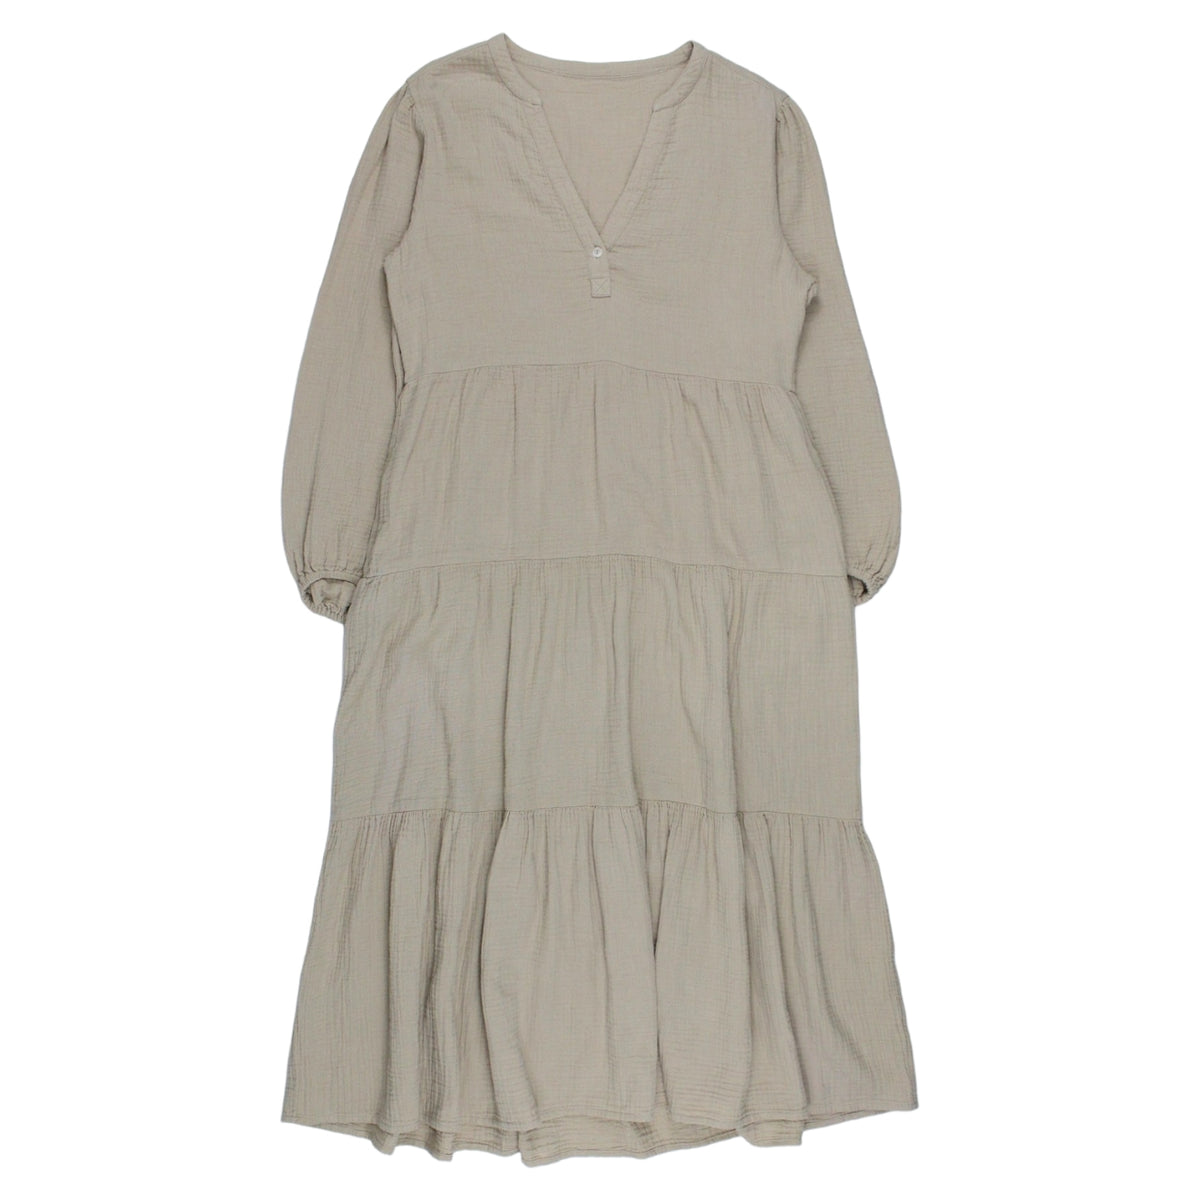 NRBY Stone Cheesecloth Midaxi Dress - Sample